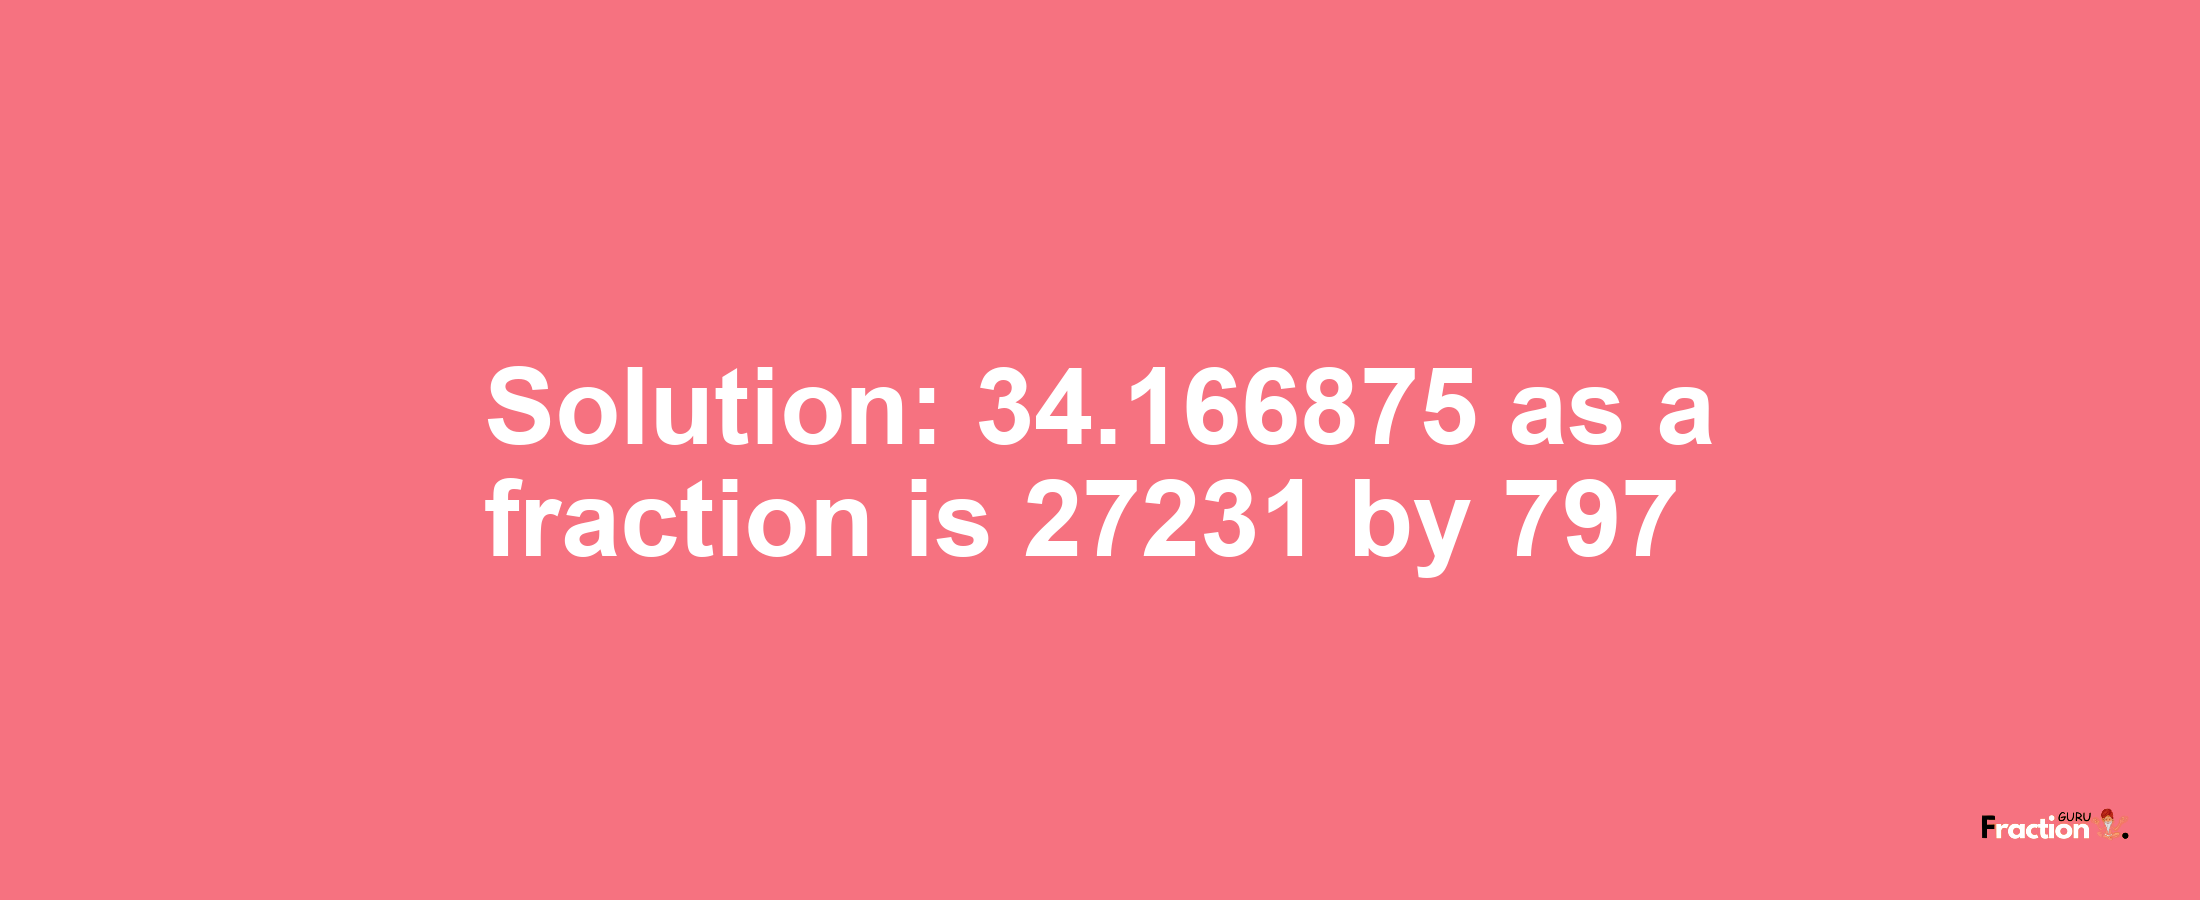 Solution:34.166875 as a fraction is 27231/797